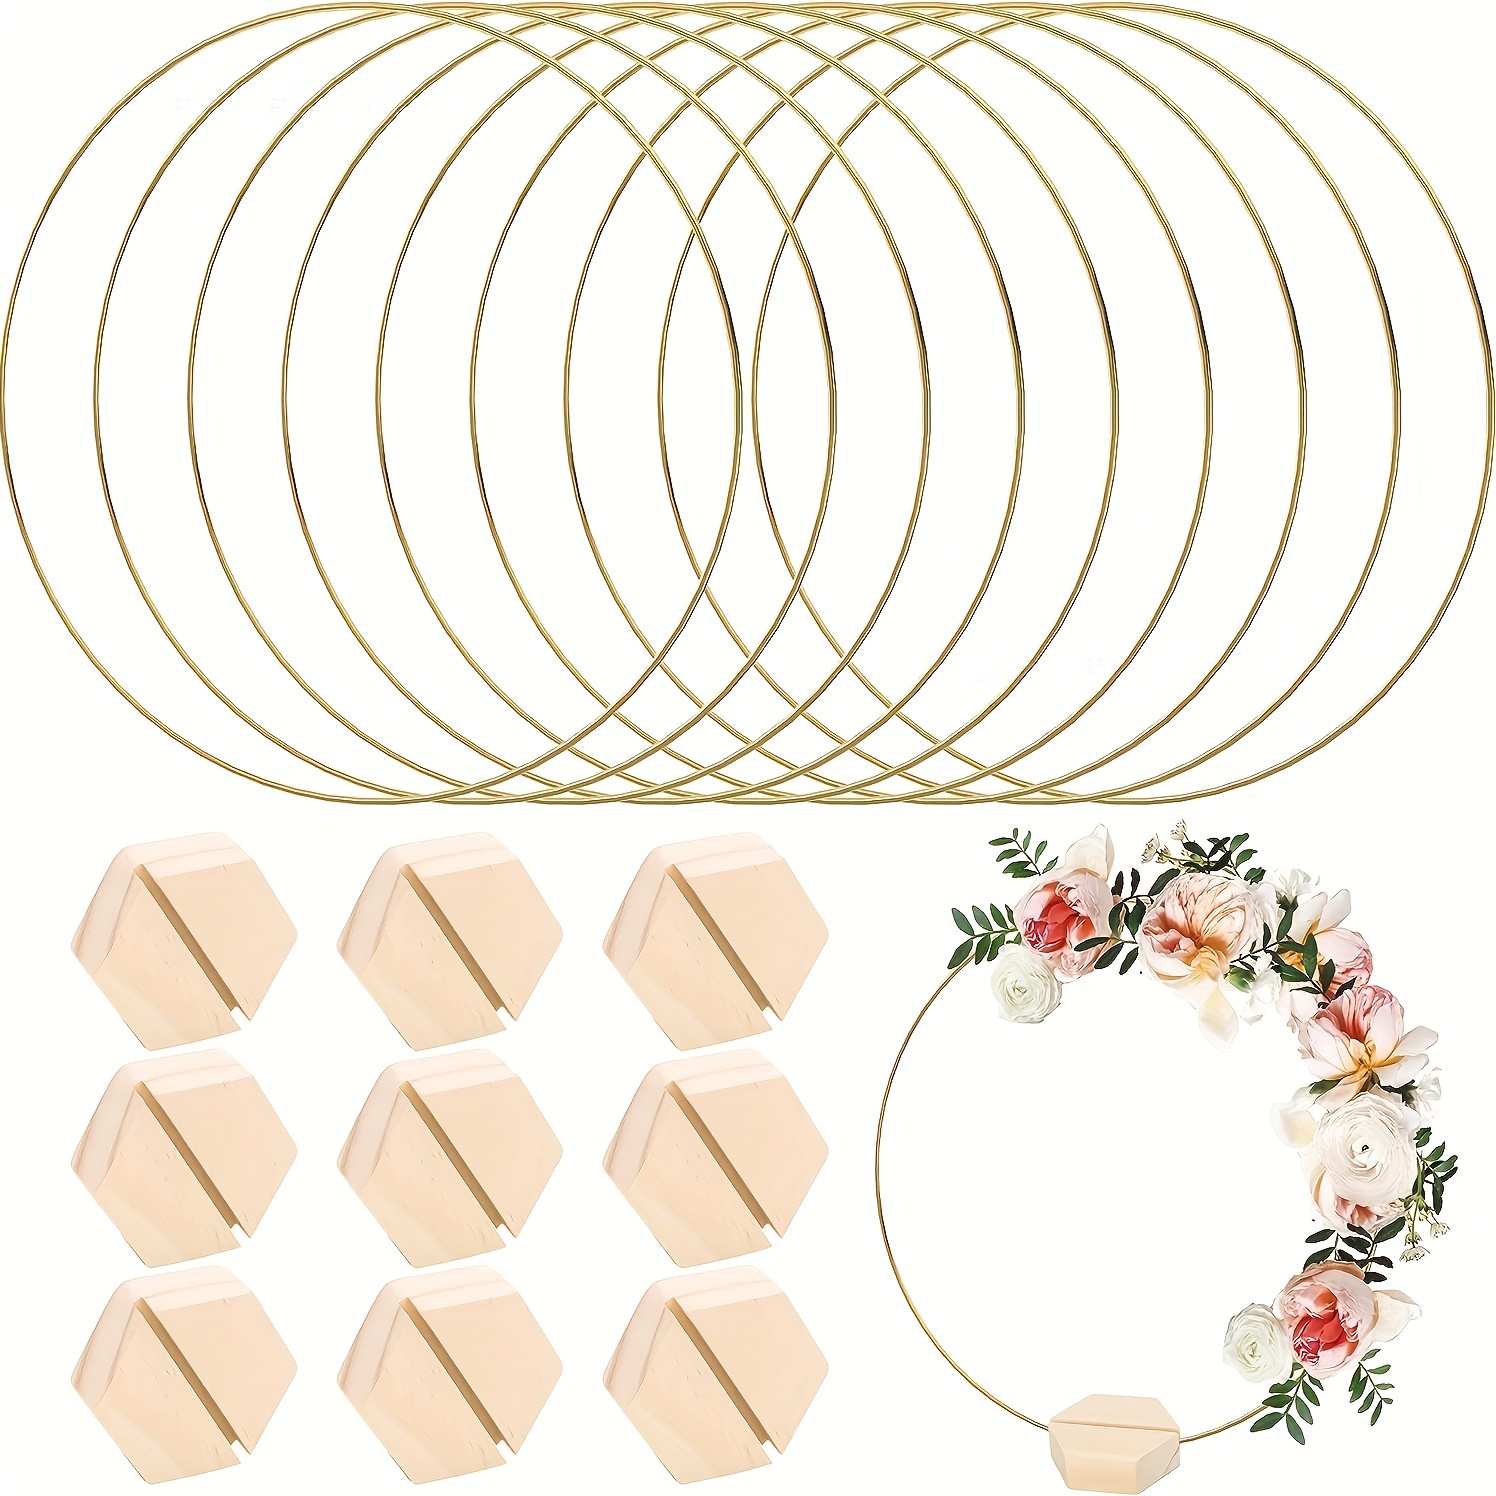 ZOOFOX 12 Pack 12 Inch Large Metal Hoops for Crafts, Metal Floral Hoop  Centerpiece Table Decorations with 12 Pieces Wooden Stands, Wreath Macrame  Gold